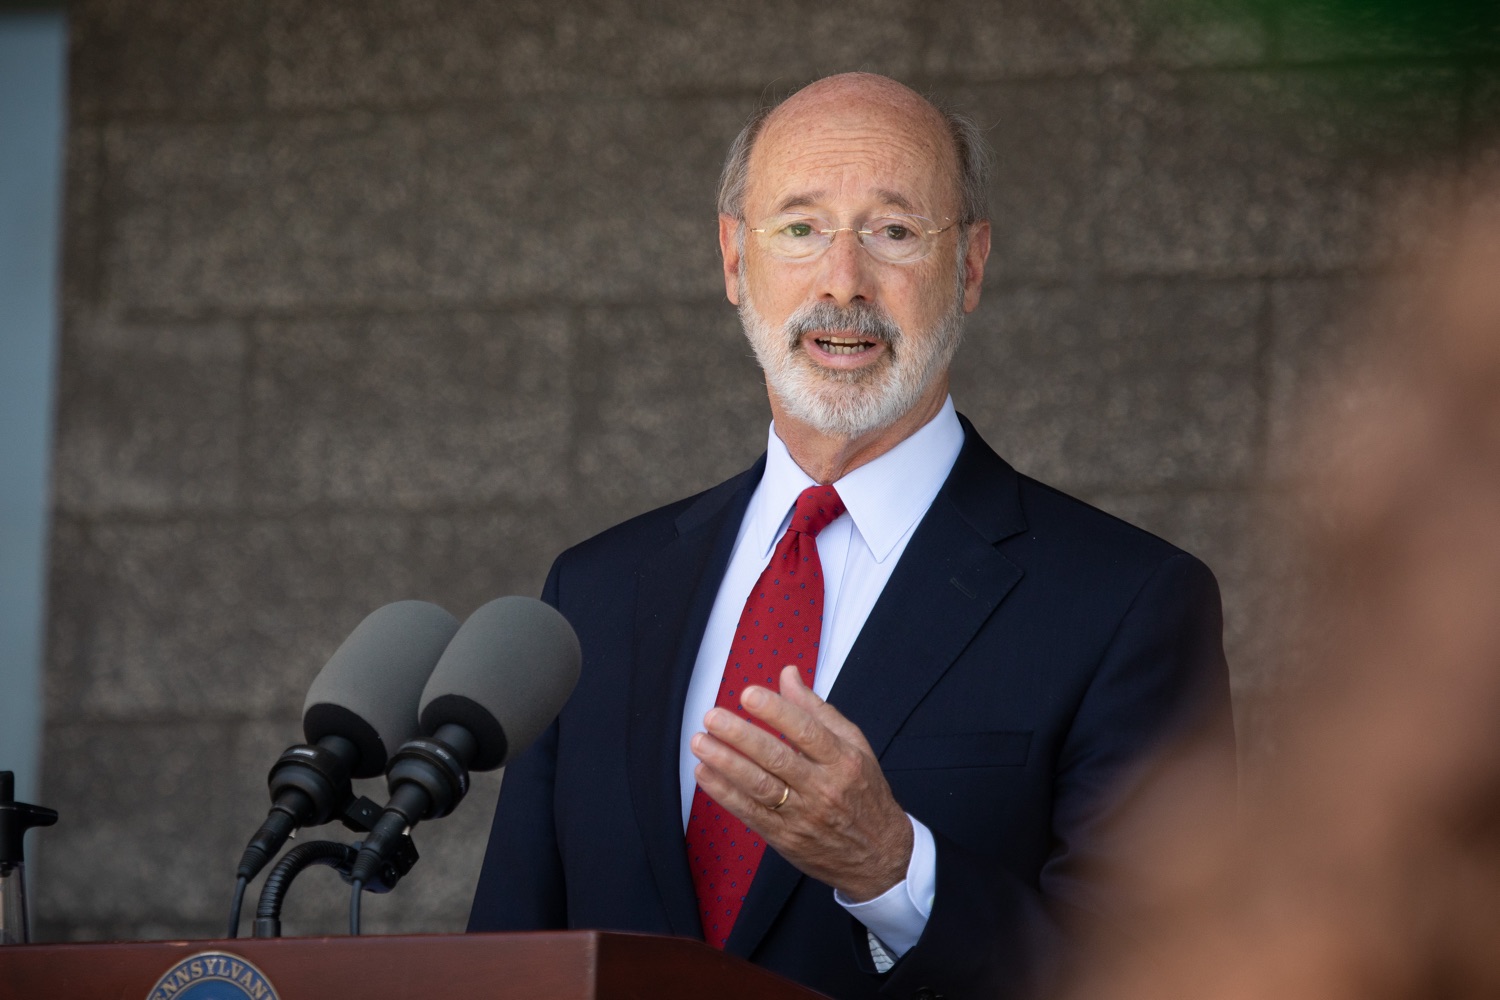 Pennsylvania Governor Tom Wolf speaking with the press.  Governor Tom Wolf visited the child care center at PSECU headquarters in Harrisburg today to announce $53 million in additional financial support for child care providers that have suffered during COVID-19.  Harrisburg, PA  July 6, 2020..<br><a href="https://filesource.amperwave.net/commonwealthofpa/photo/18143_gov_cares_dz_15.jpg" target="_blank">⇣ Download Photo</a>